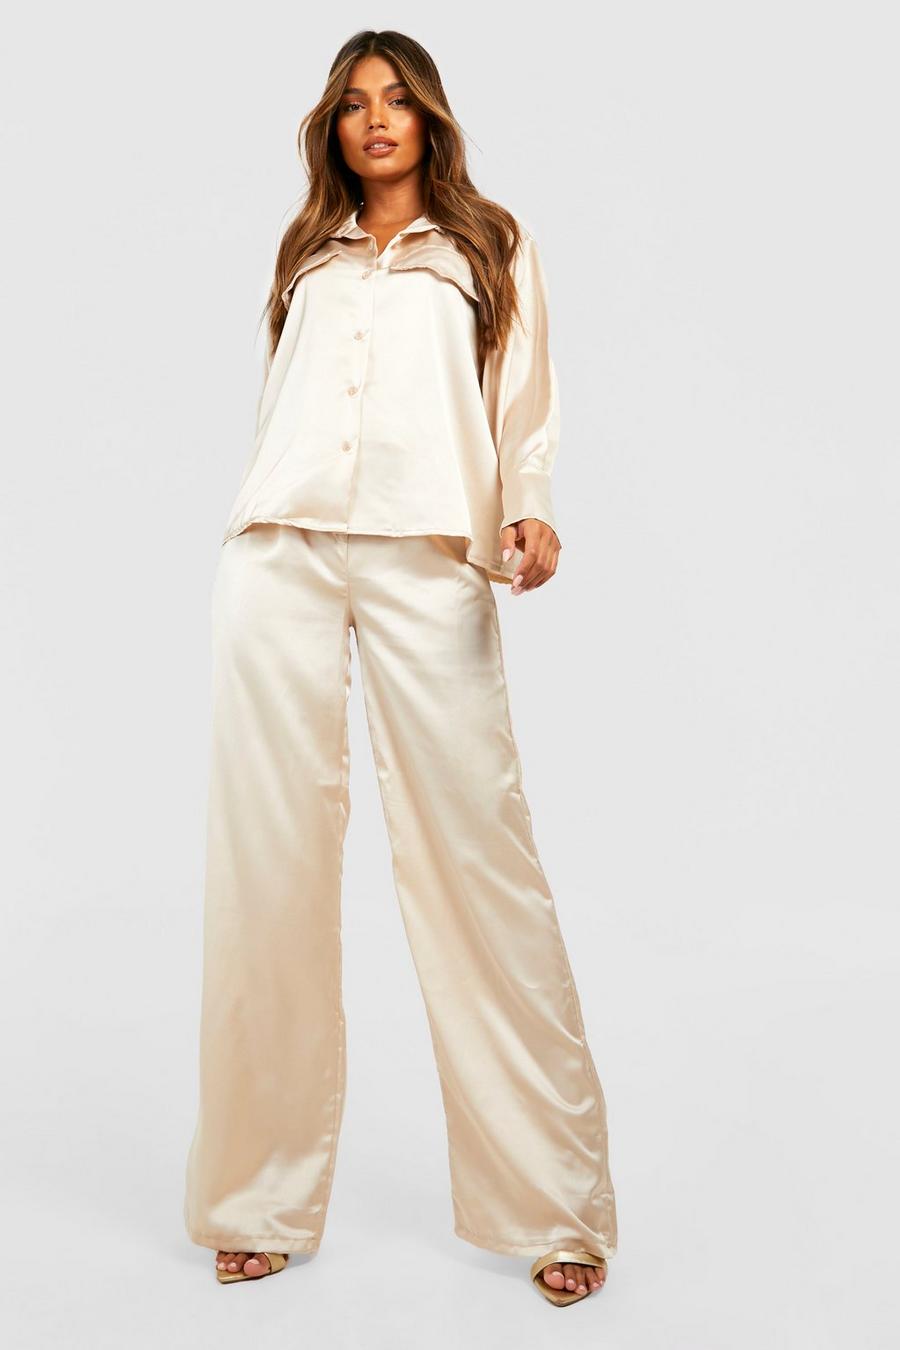 Champagne beige Satin Relaxed Fit Shirt & Wide Leg Pants